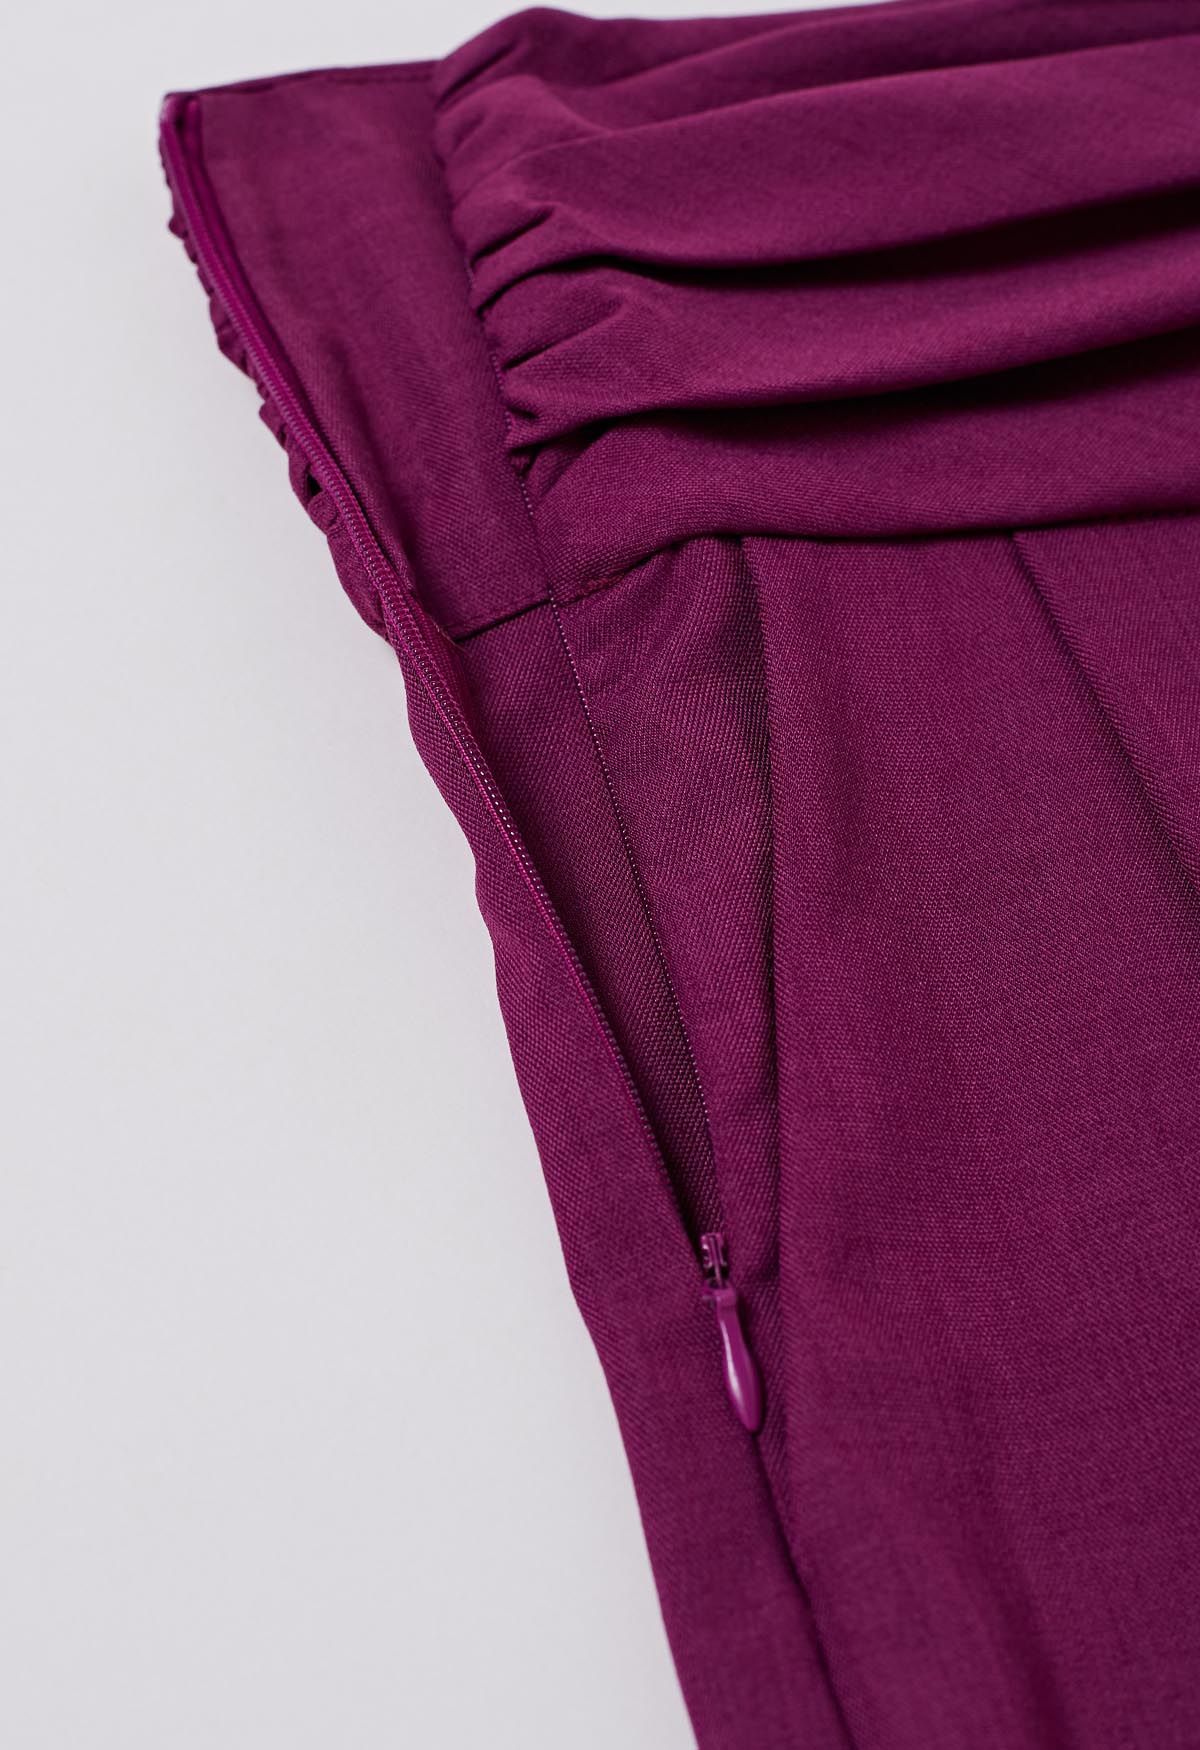 Ruched High Waist Pleated Wide-Leg Pants in Magenta - Retro, Indie and ...